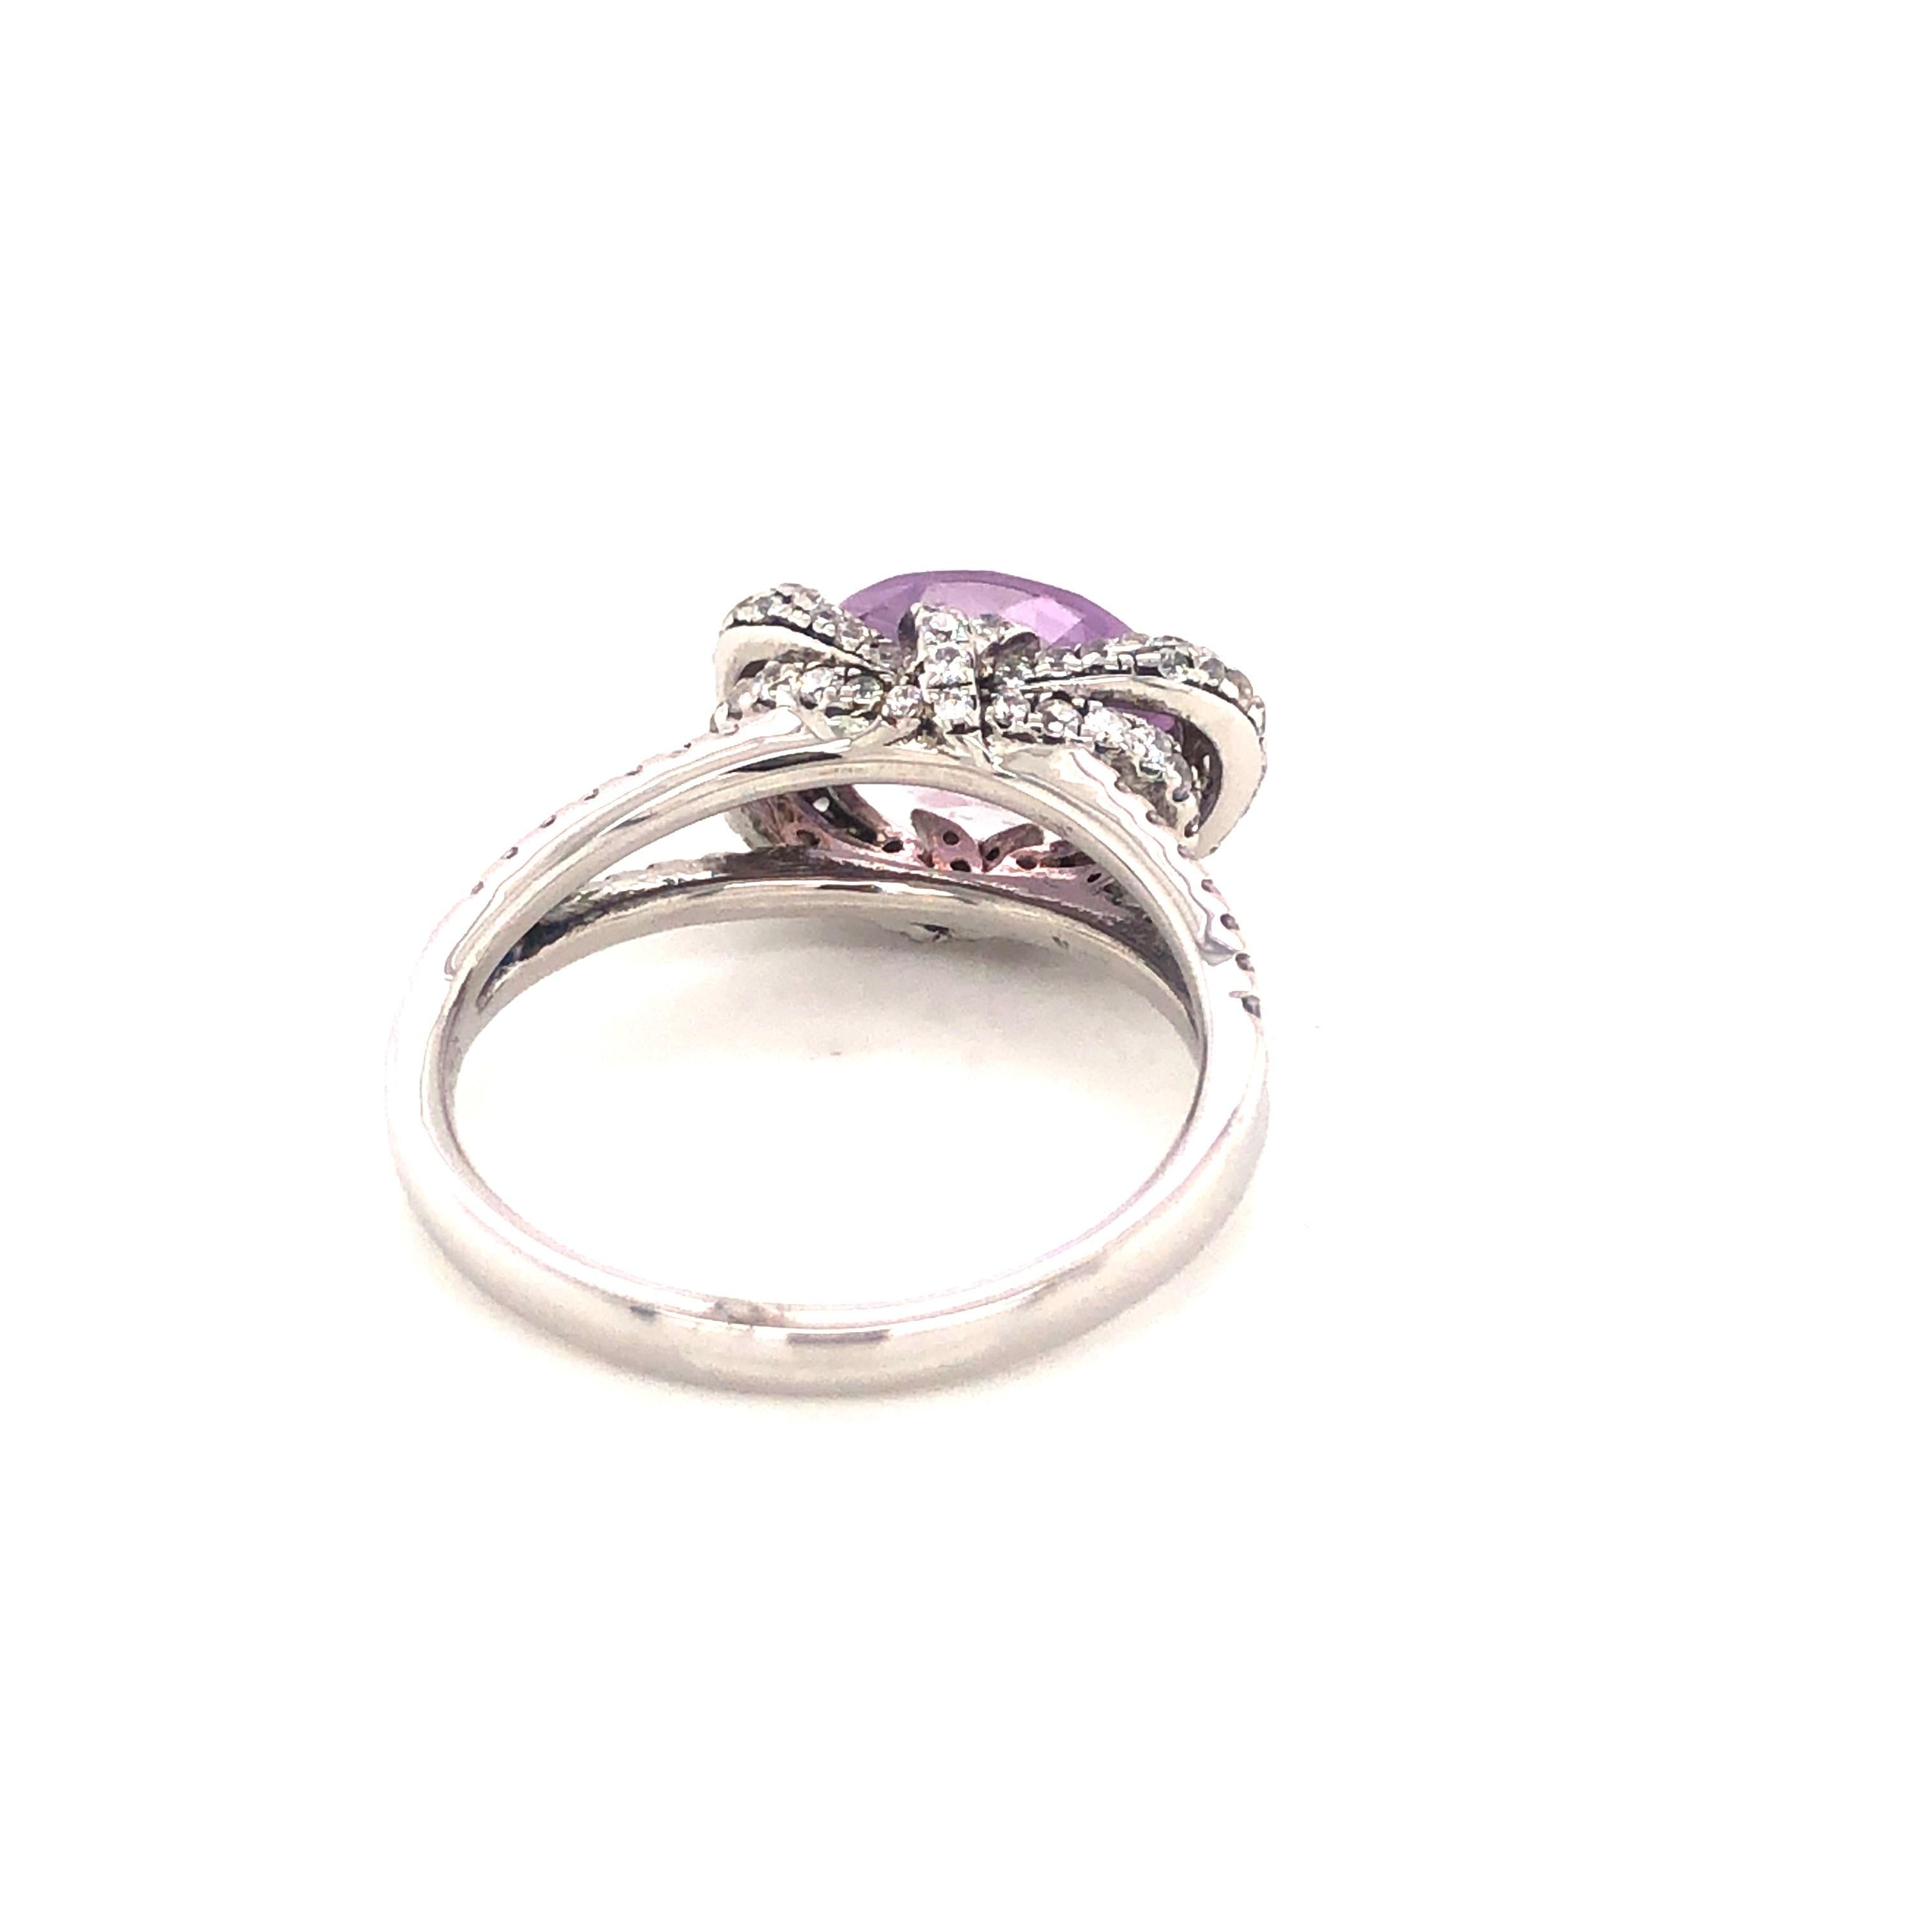 1.37 Carat Fancy Cushion Cut Amethyst Sterling Silver Engagement Bridal Ring In New Condition For Sale In London, GB